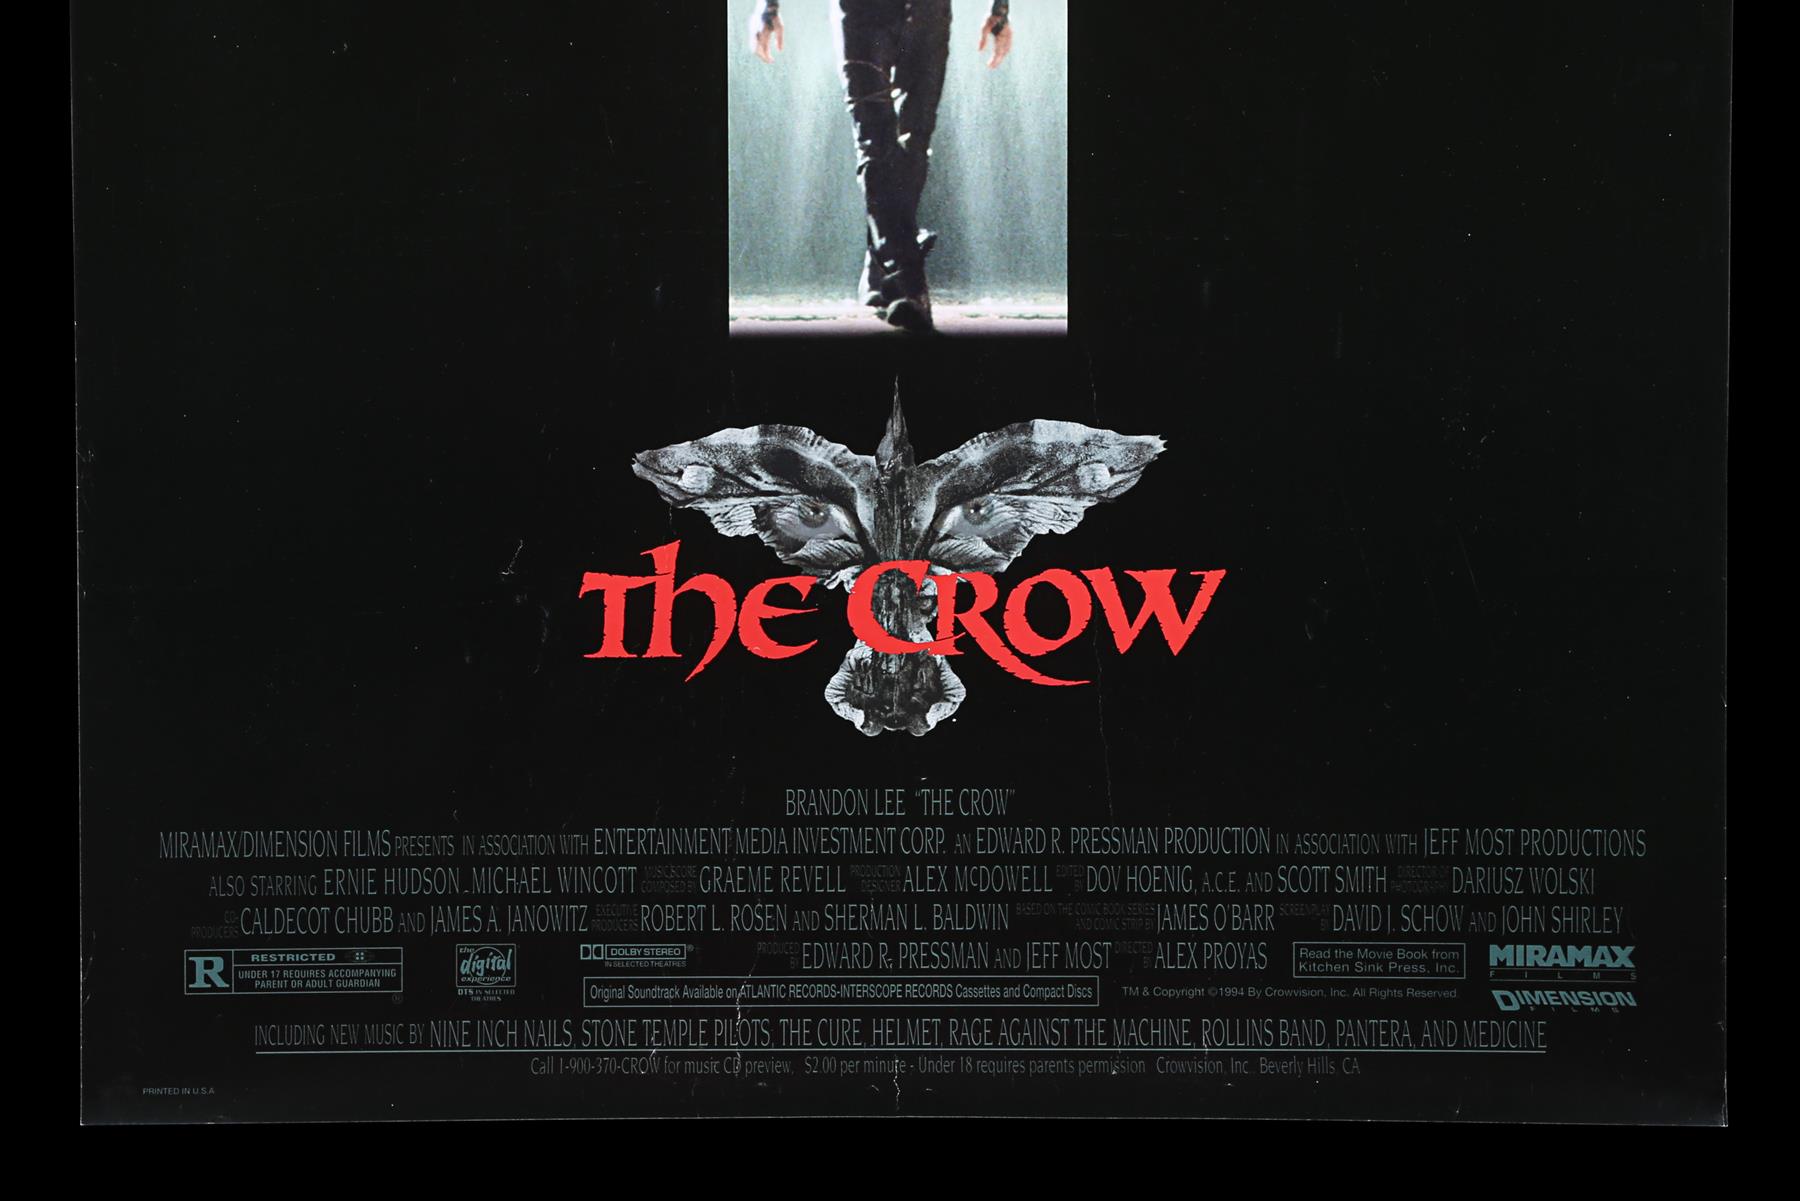 THE CROW (1994) - US One-Sheet and UK Quad, 1994 - Image 4 of 7